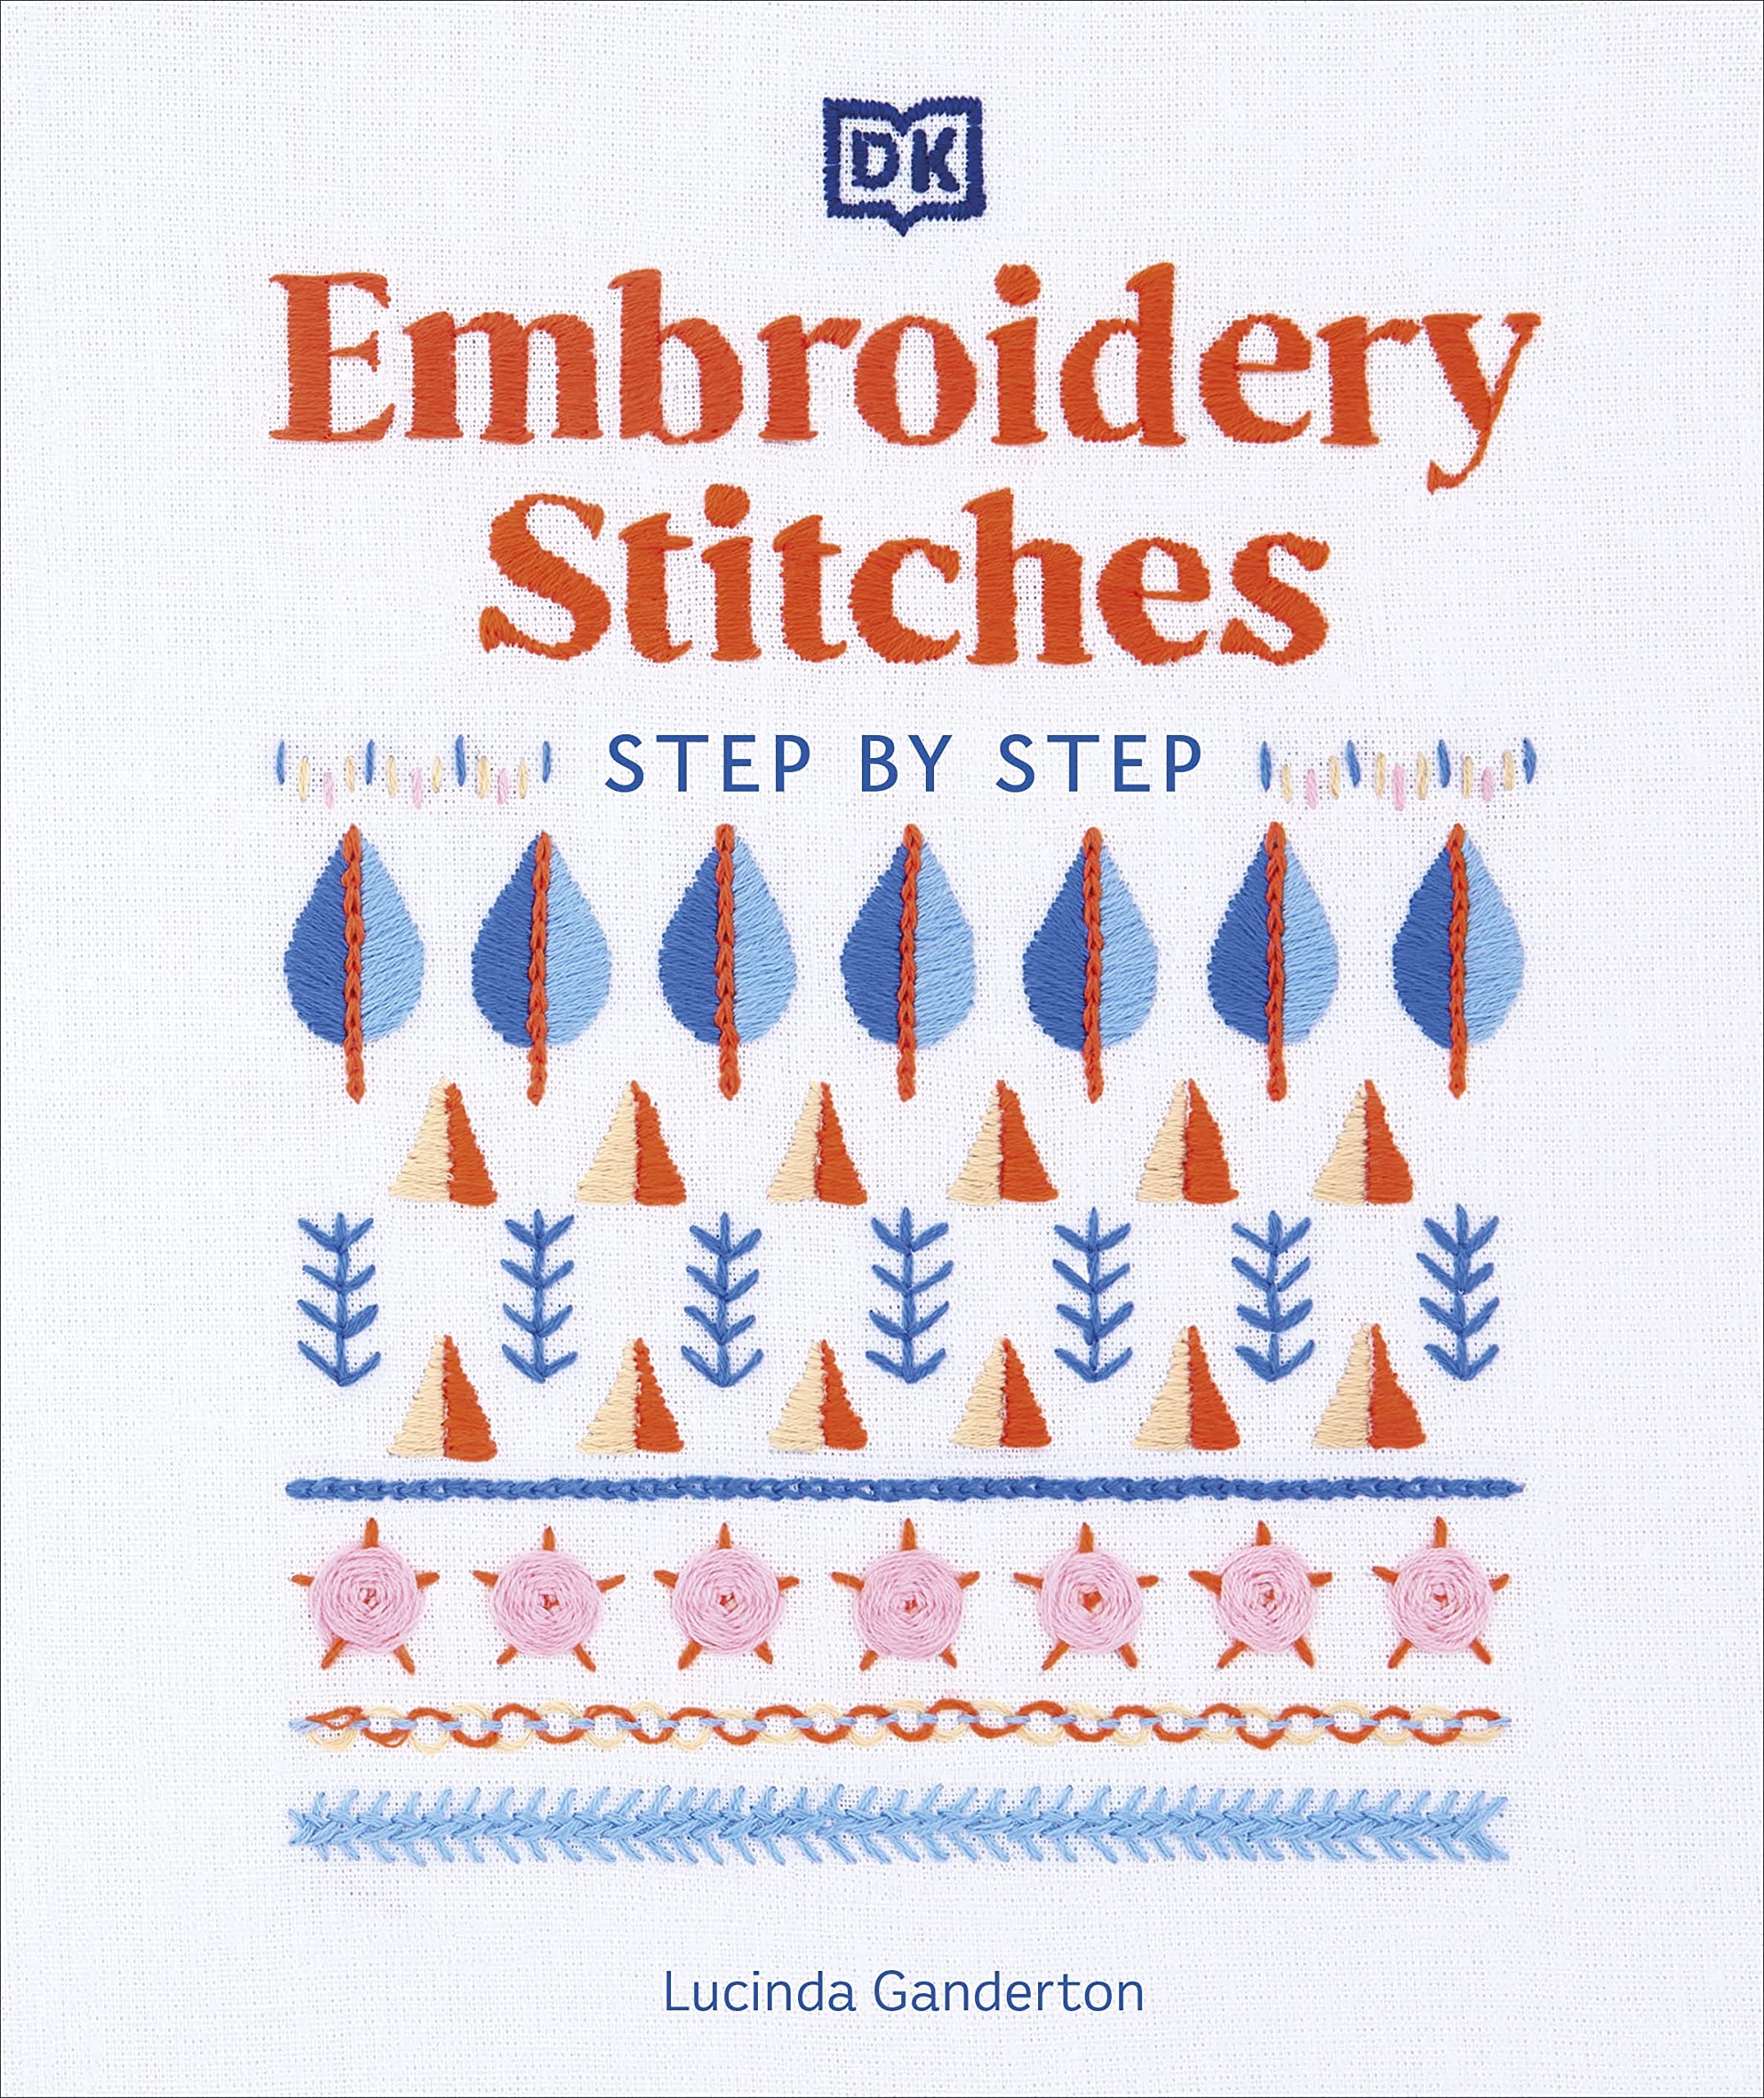 Embroidery stitches step-by-step